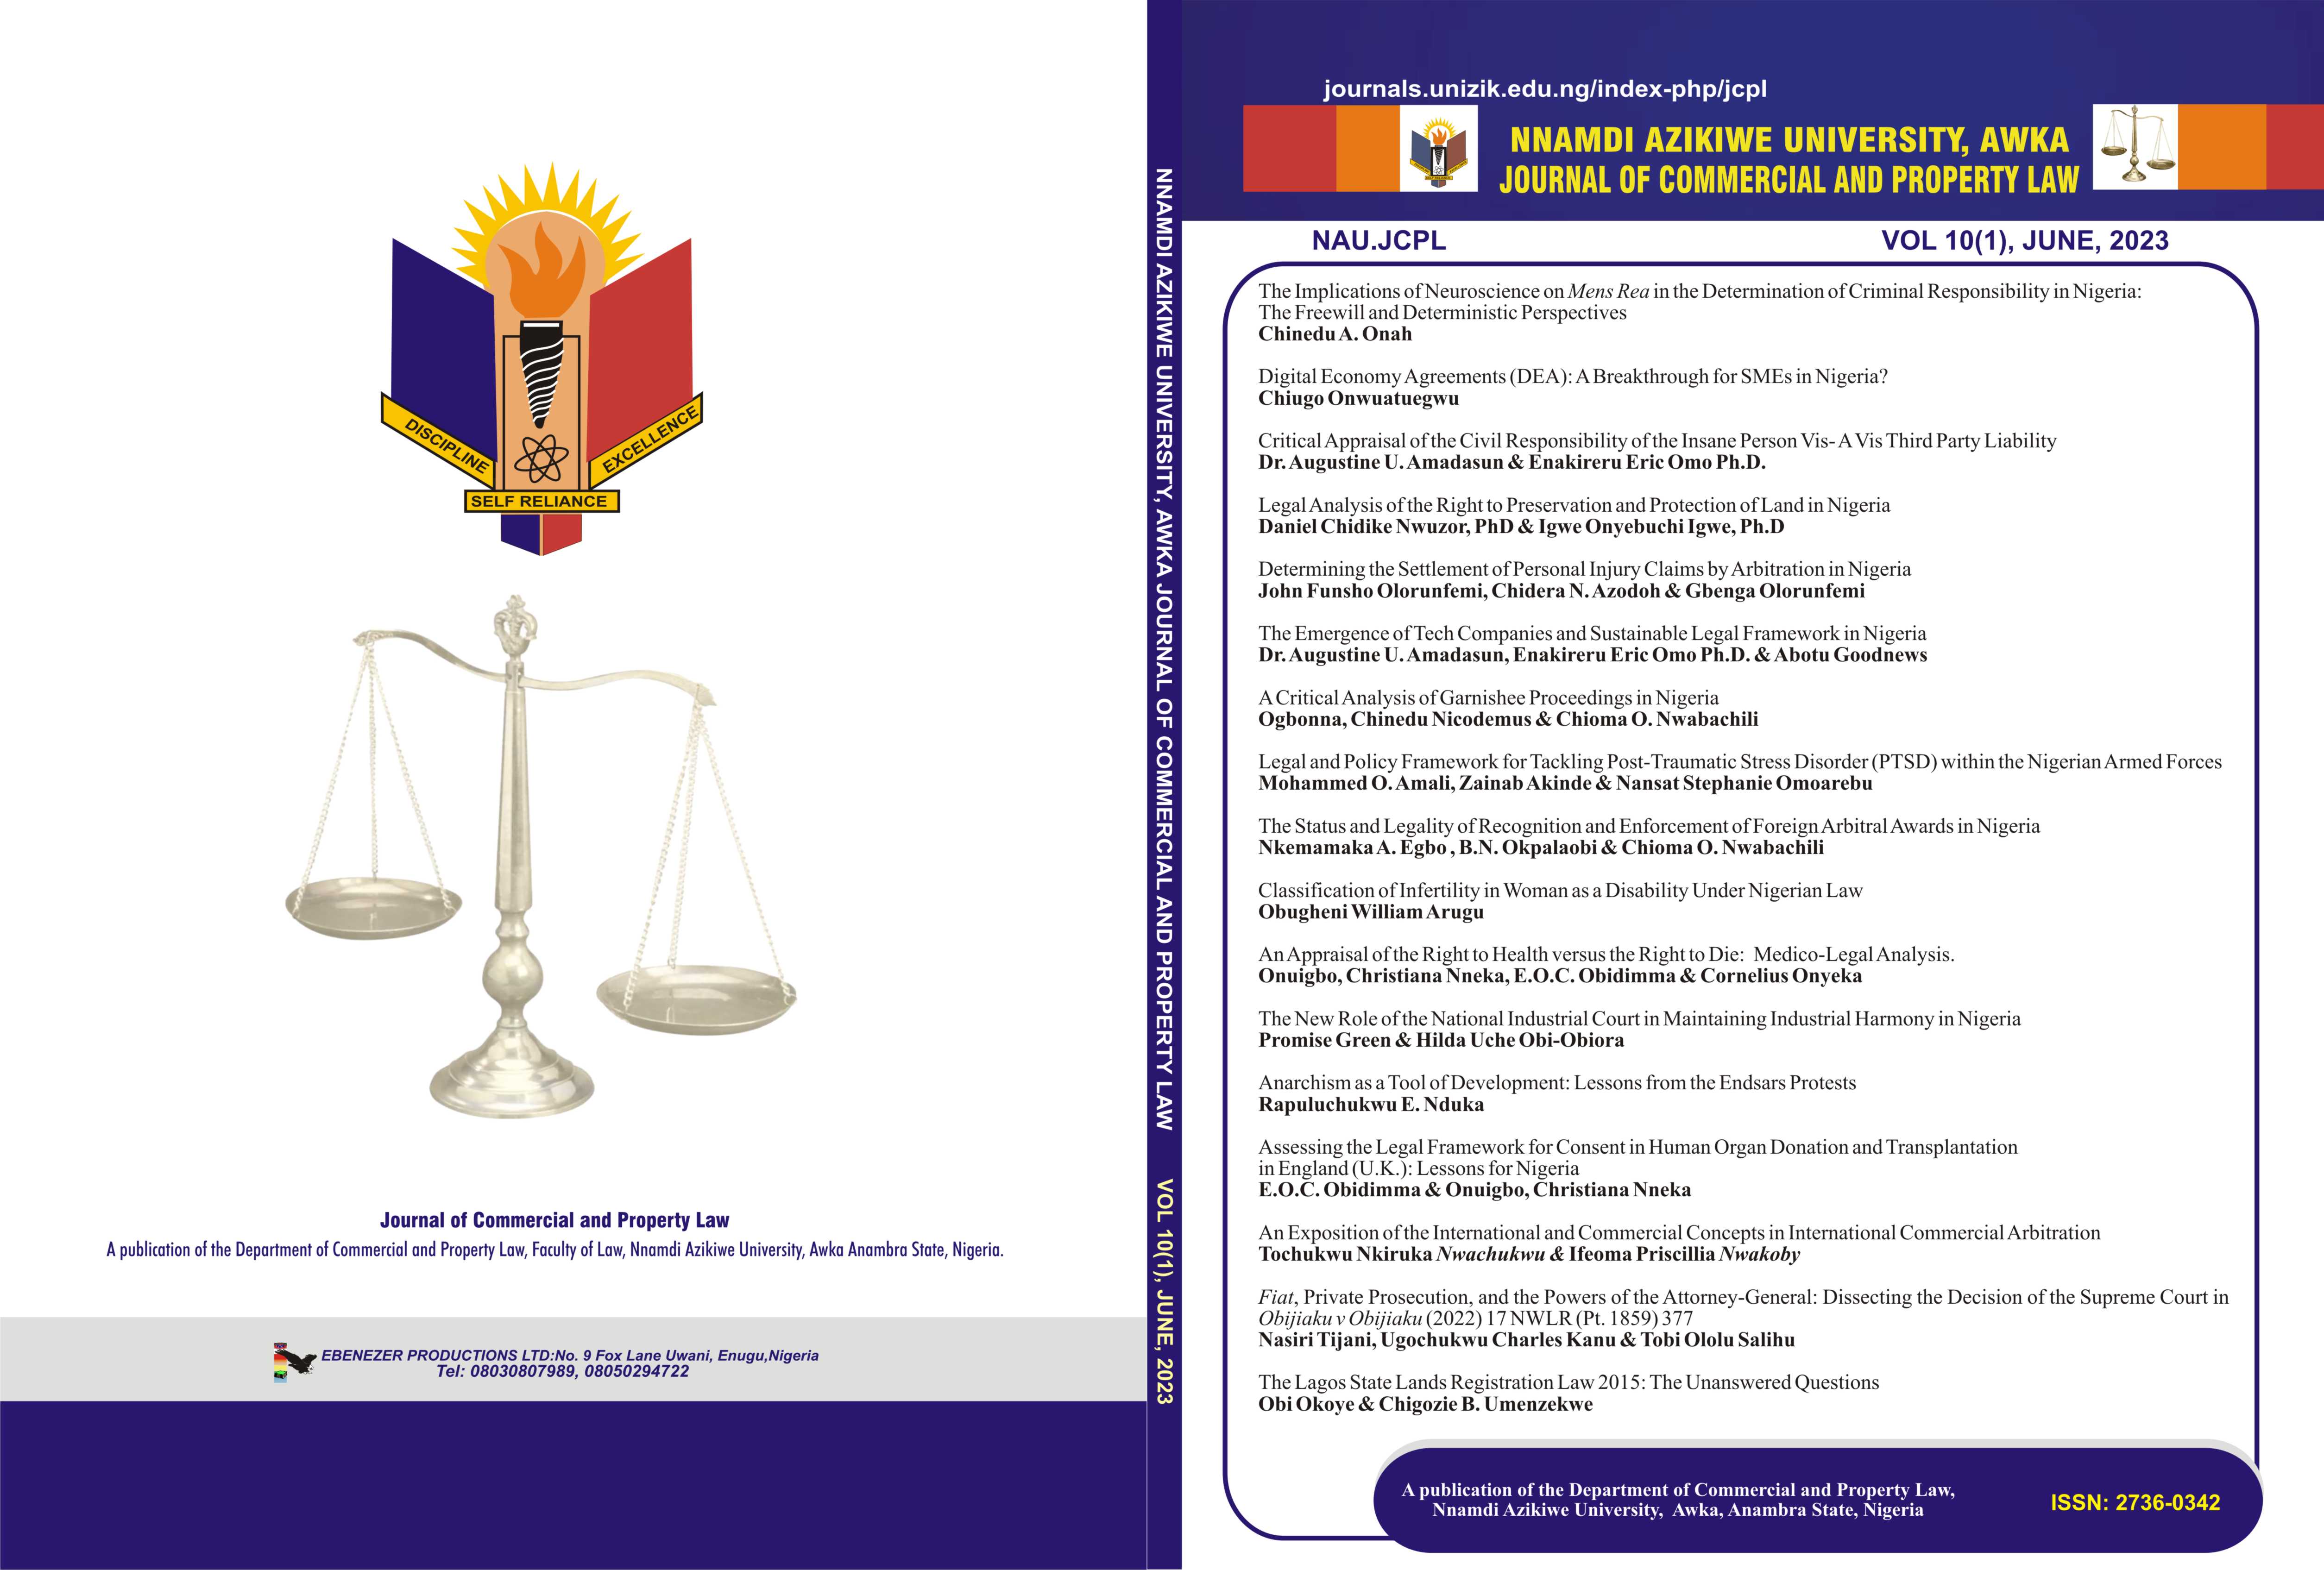 					View Vol. 10 No. 2 (2023): NNAMDI AZIKIWE UNIVERSITY JOURNAL OF COMMERCIAL AND PROPERTY LAW
				